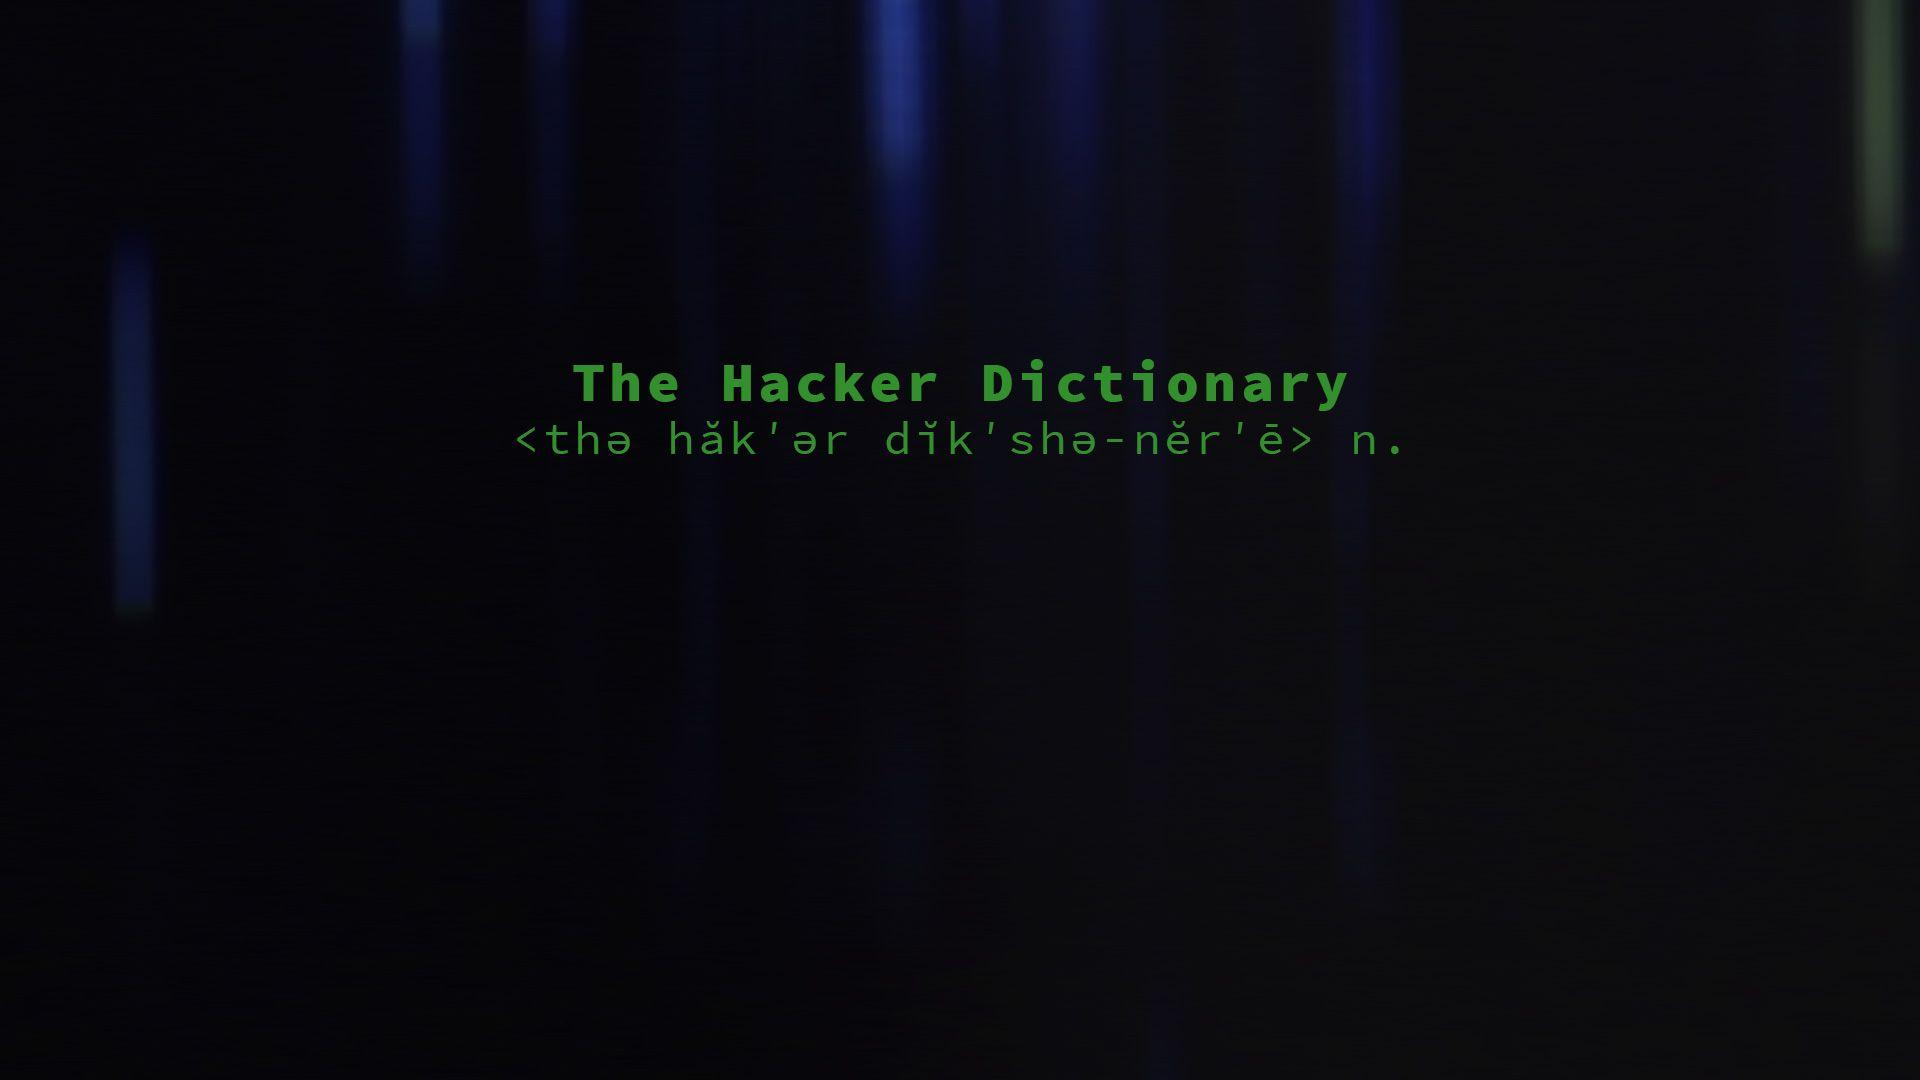 The Hacker Dictionary. Photo Galleries. Mr. Robot